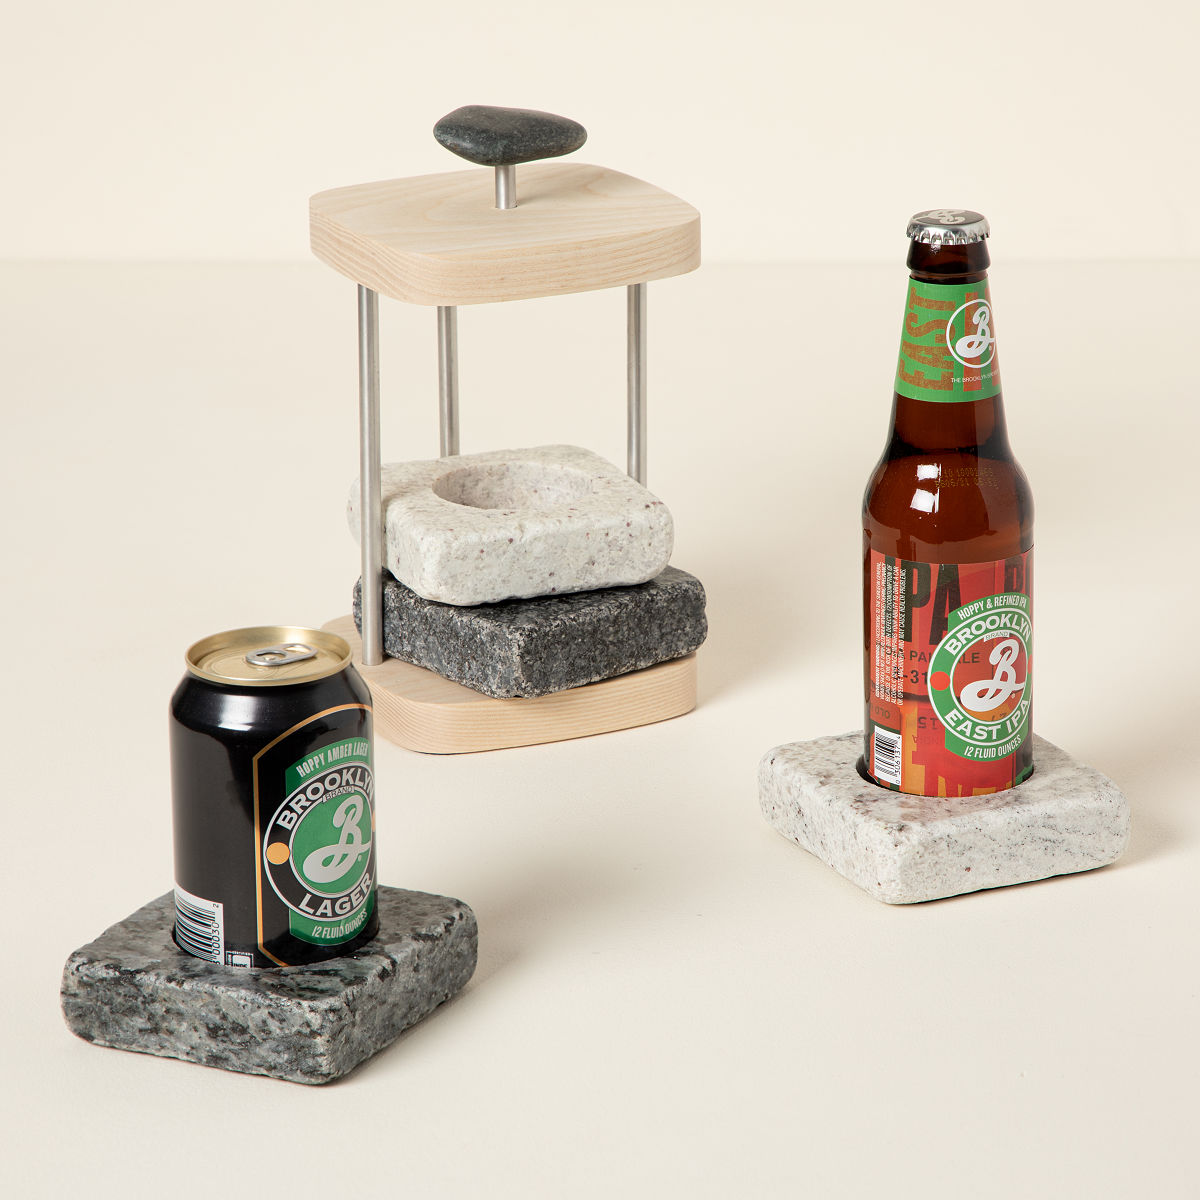 15 Great Gifts for a Beer Lover